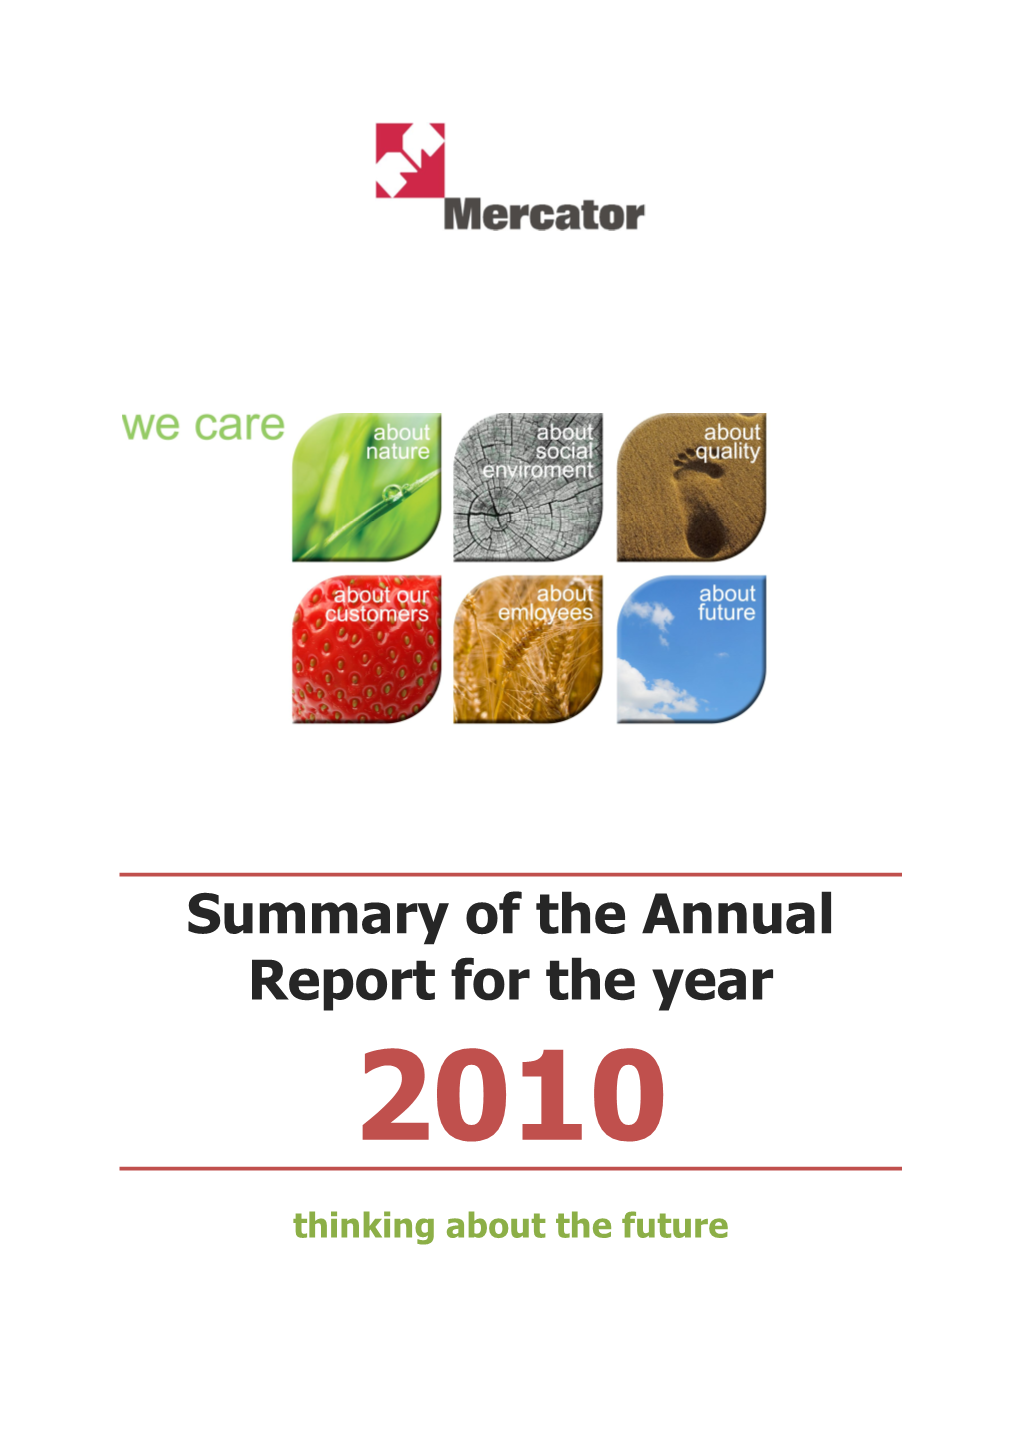 Summary of the Annual Report for the Year 2010